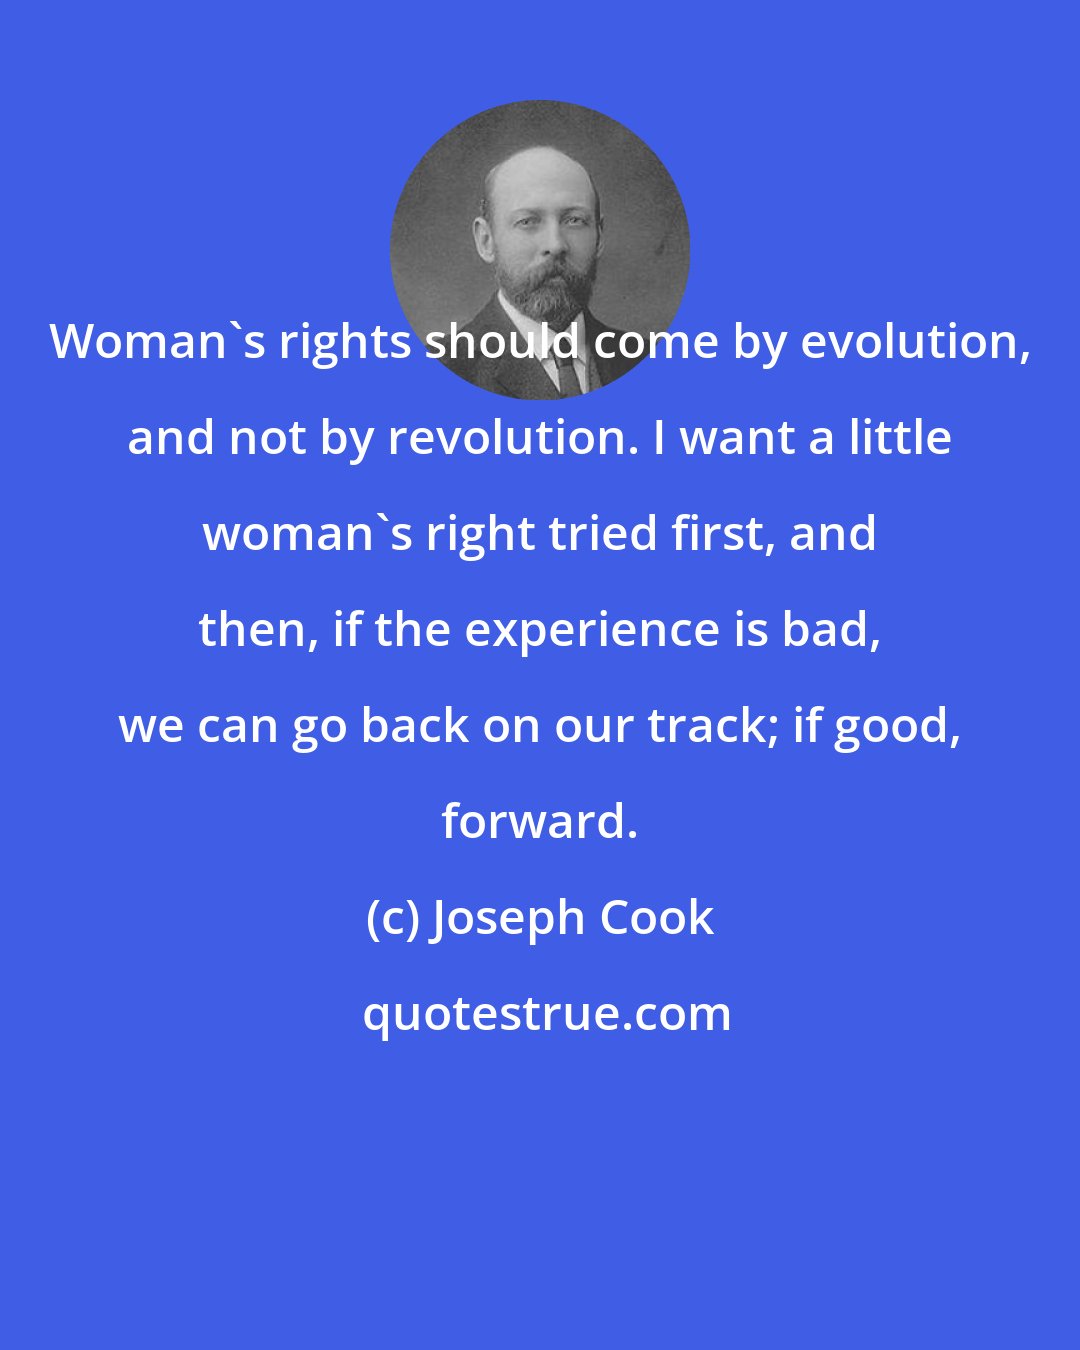 Joseph Cook: Woman's rights should come by evolution, and not by revolution. I want a little woman's right tried first, and then, if the experience is bad, we can go back on our track; if good, forward.